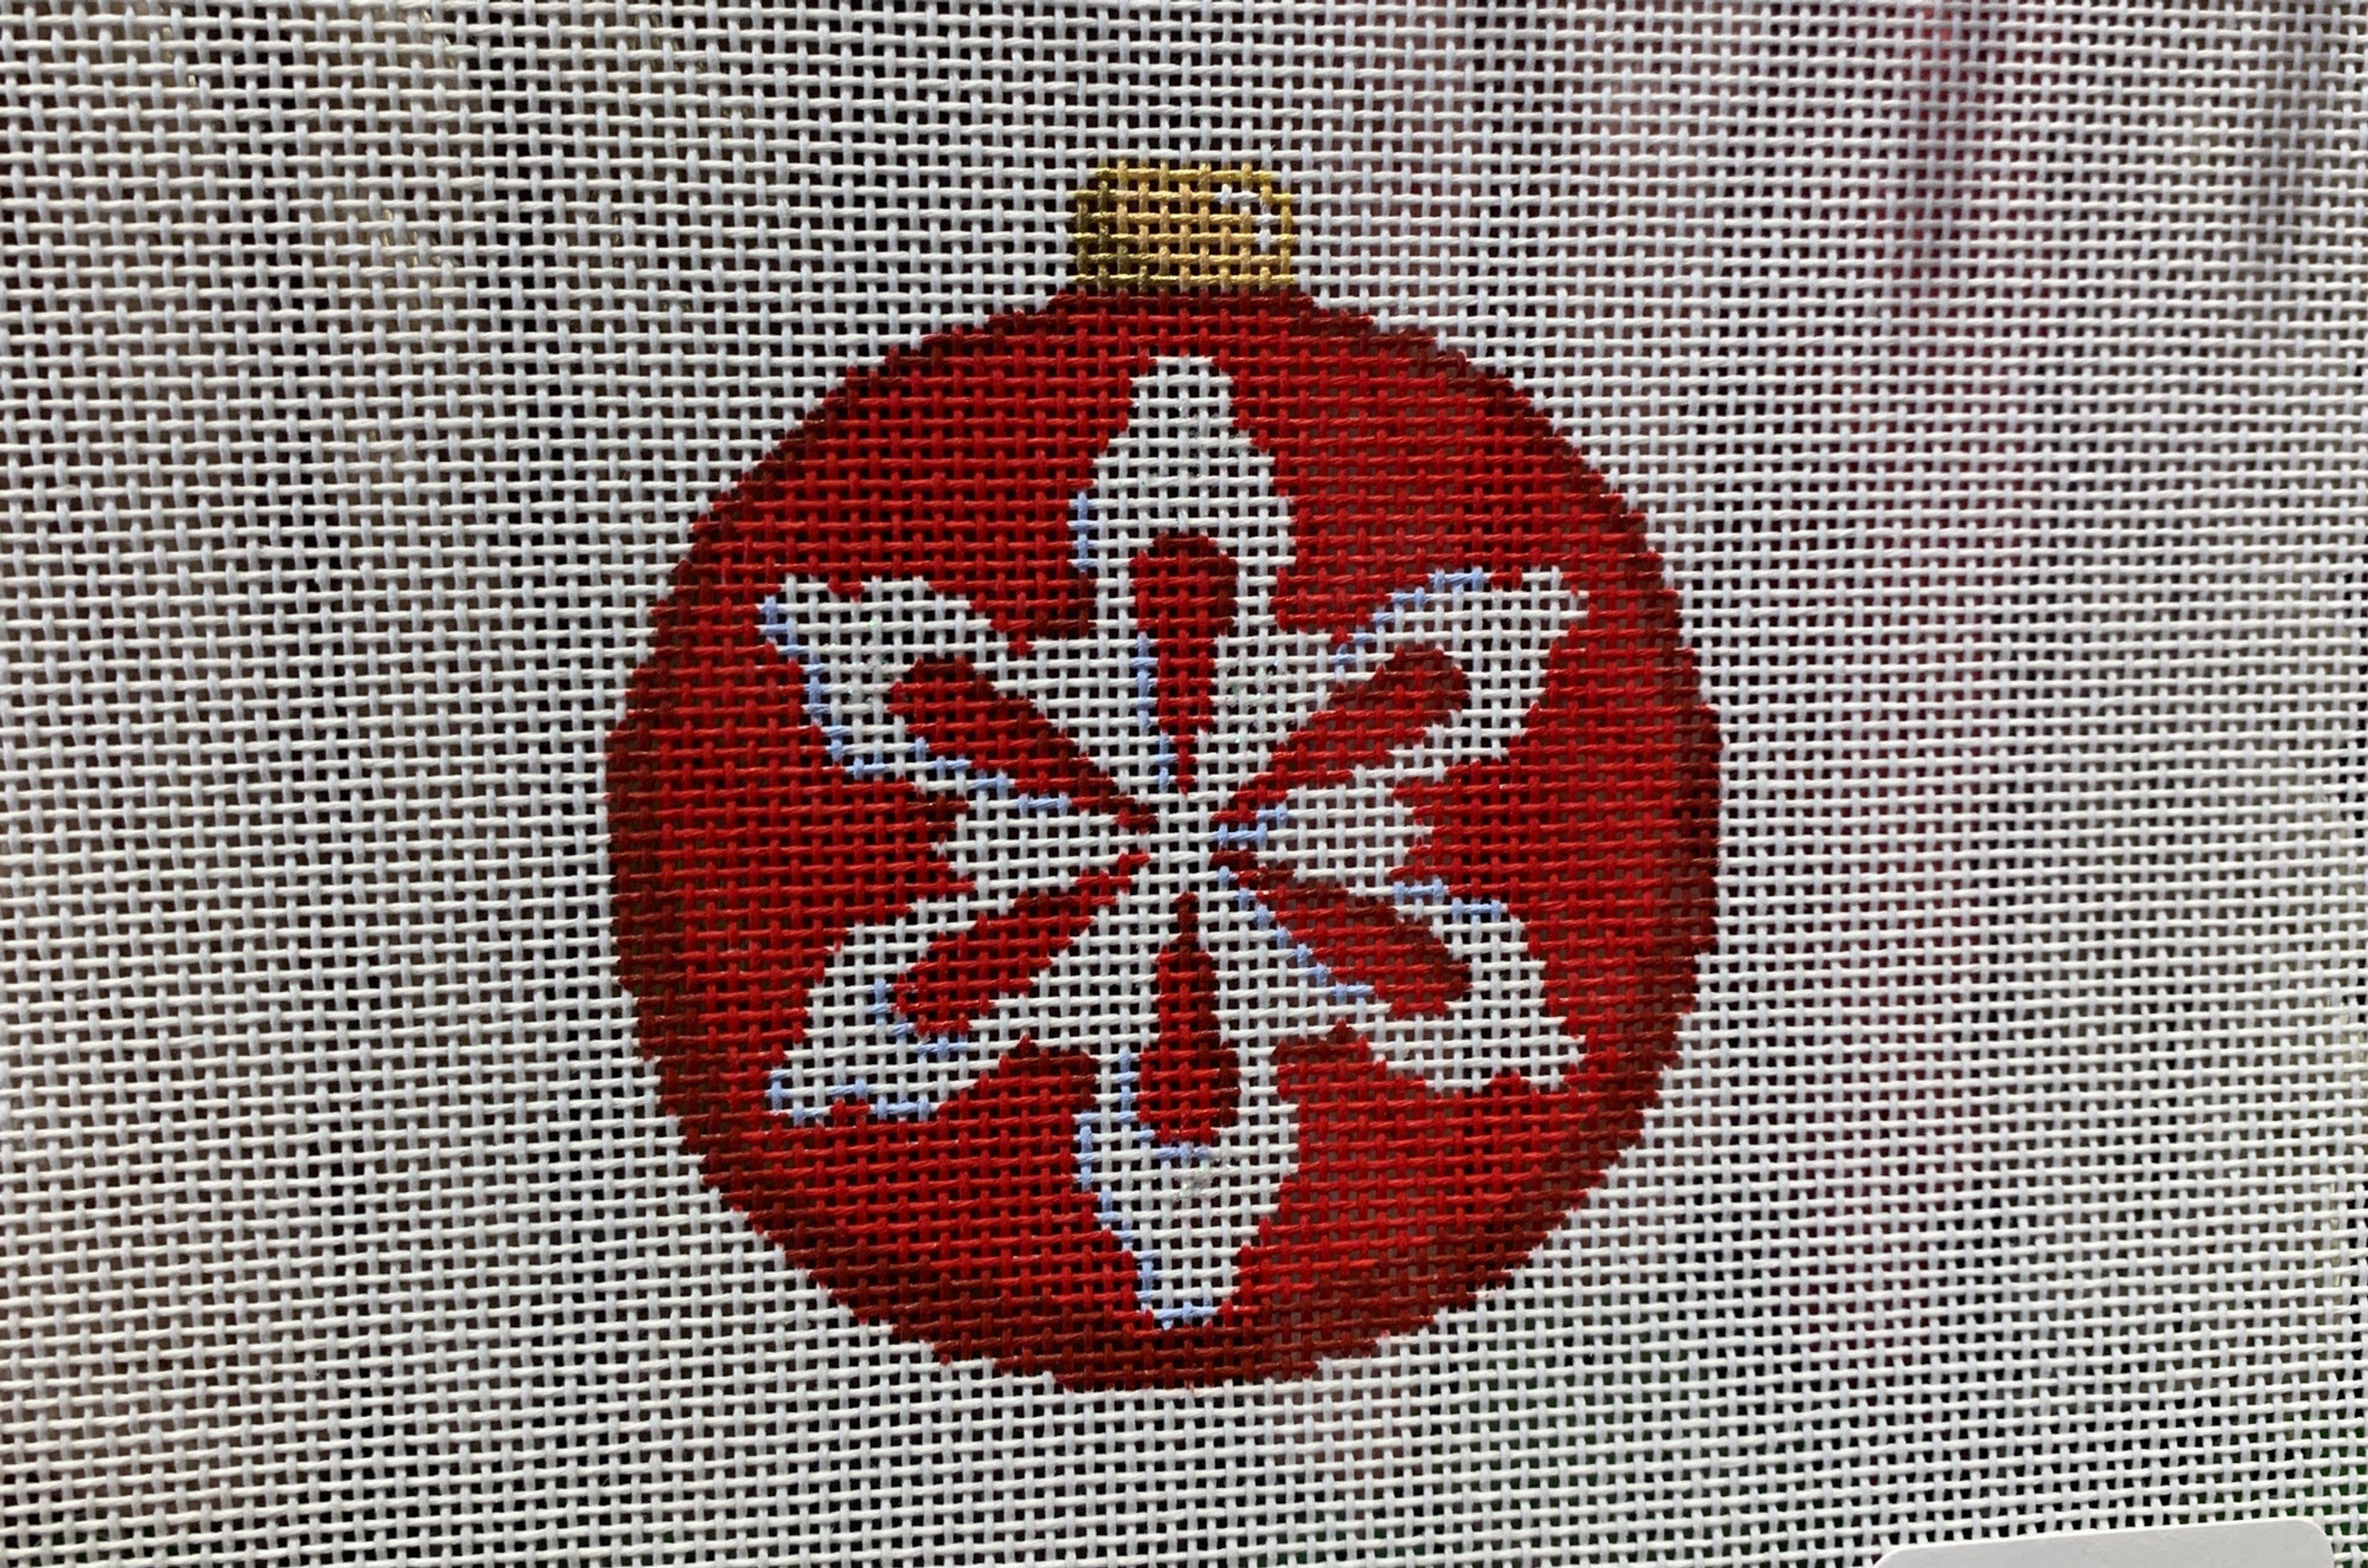 Associated Talents CT1814 Red Snowflake Ornament